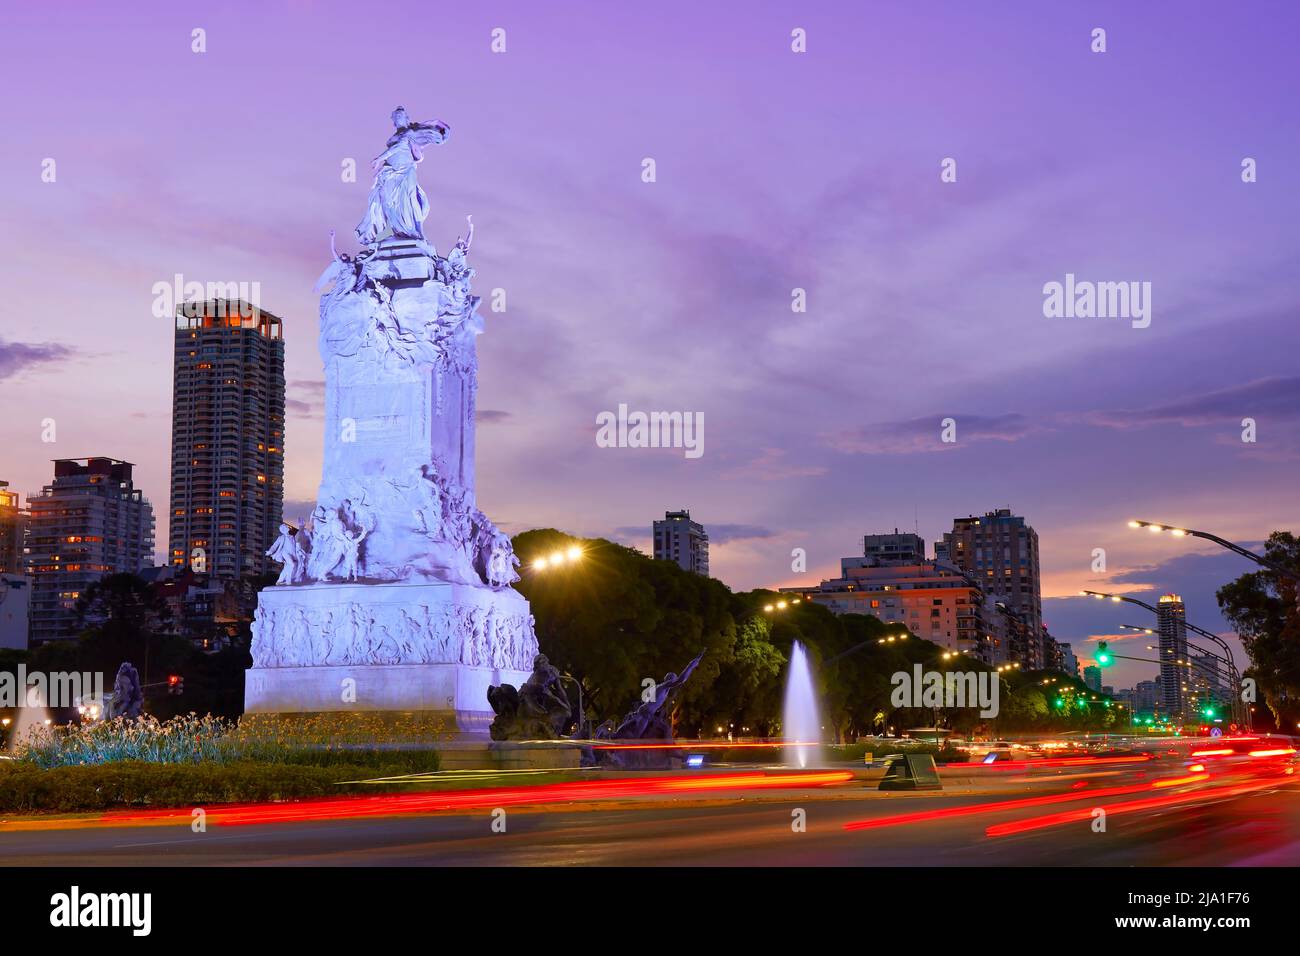 The 'Monument to the Carta Magna and Four Regions of Argentina', commonly known as the 'Monument of the Spanish' at twilight, Buenos Aires, Argentina. Stock Photo